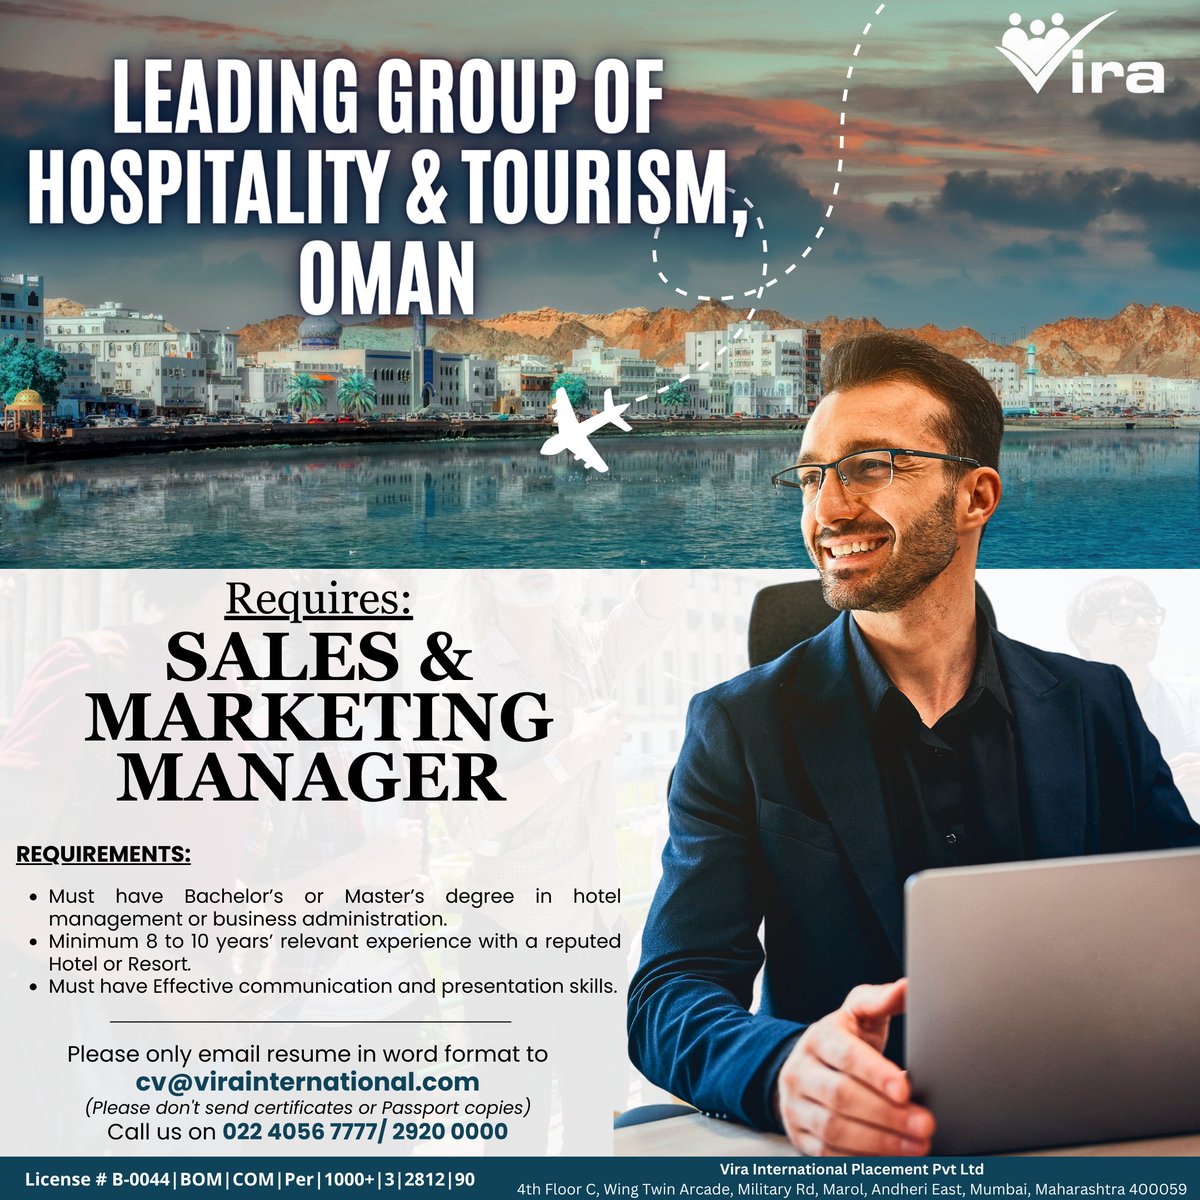 Leading Group of Hospitality & Tourism, Oman!

Requires:
Sales & Marketing Manager

Please only email resume in word format to cv@virainternational.com
Call us on 022 4056 7777/ 2920 0000

#Vira #Hospitality #Vacancy #Opportunity #Jobs #SalesManager #MarketingManager #ApplyNow